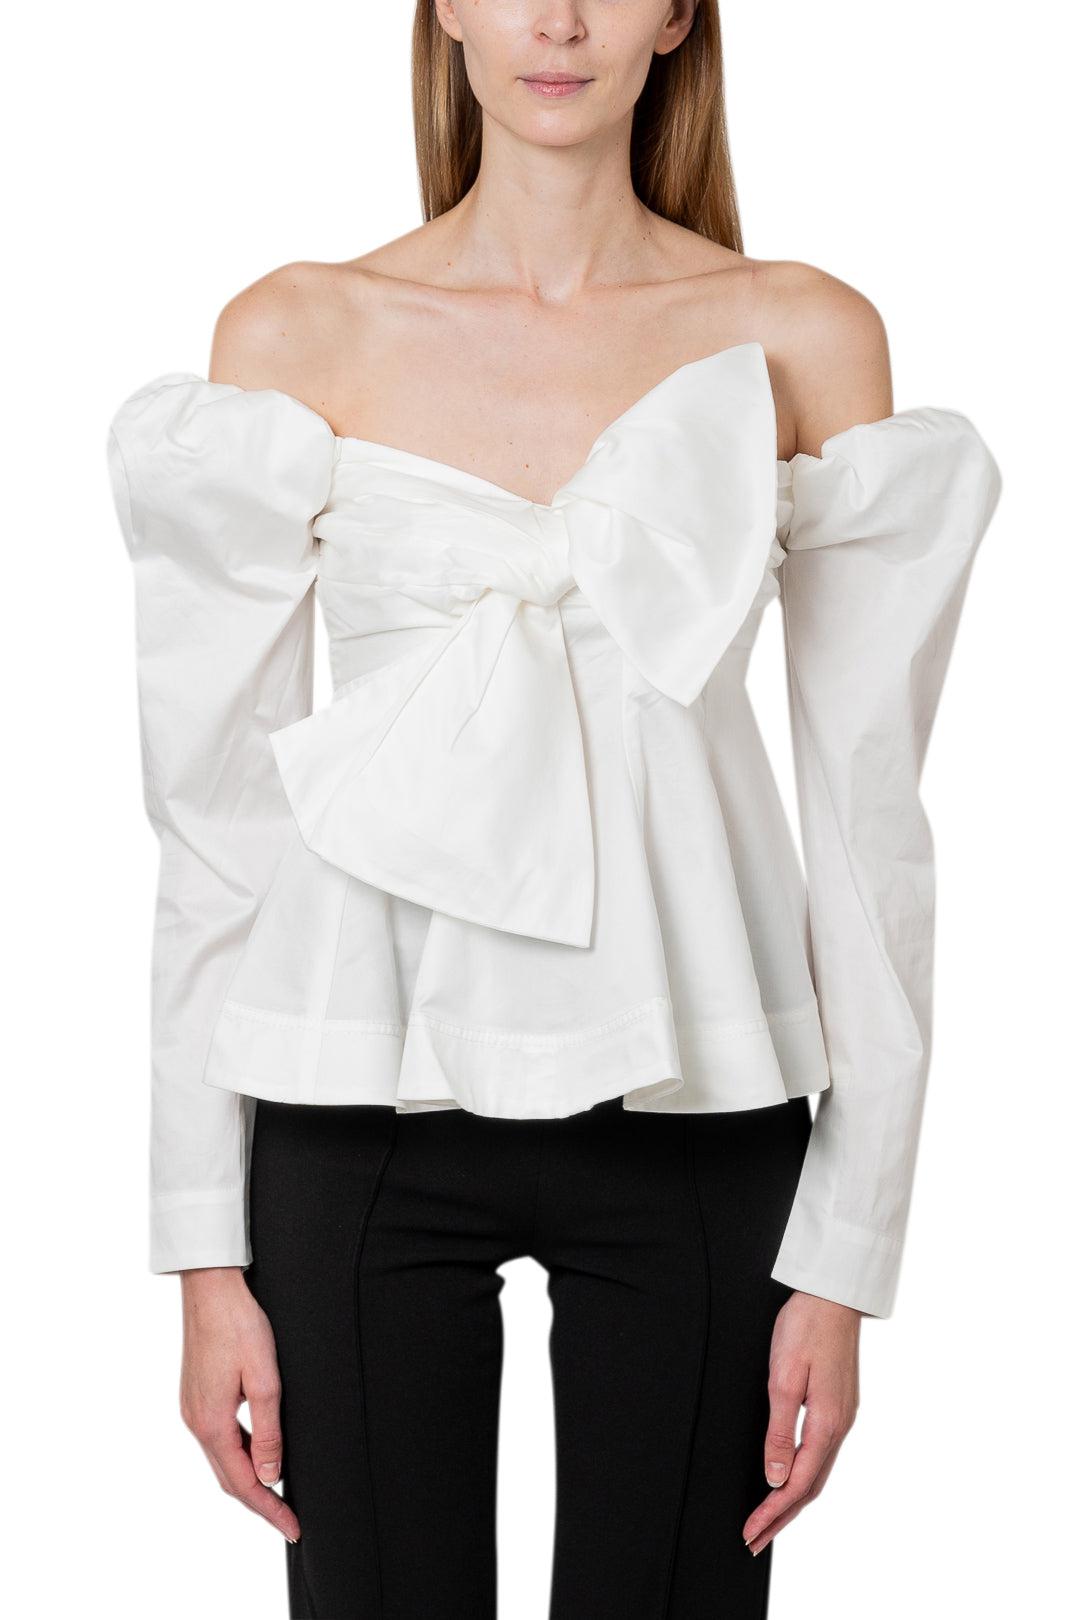 Aje-Valentina strapless bow top-AW1244-dgallerystore